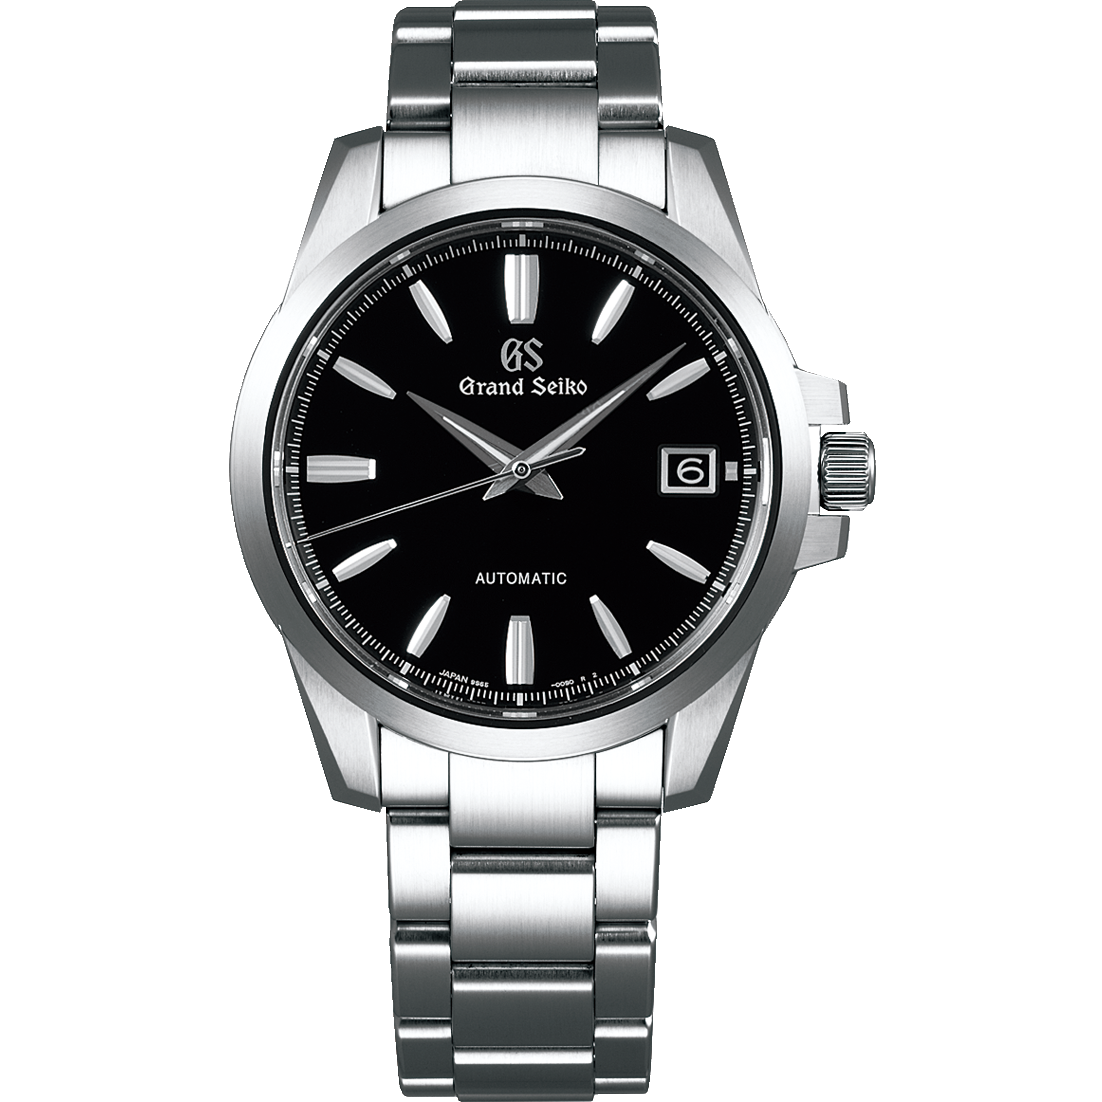 Grand Seiko Heritage Collection Automatic Watch - SBGR257G - FINAL SALE DISPLAY MODEL